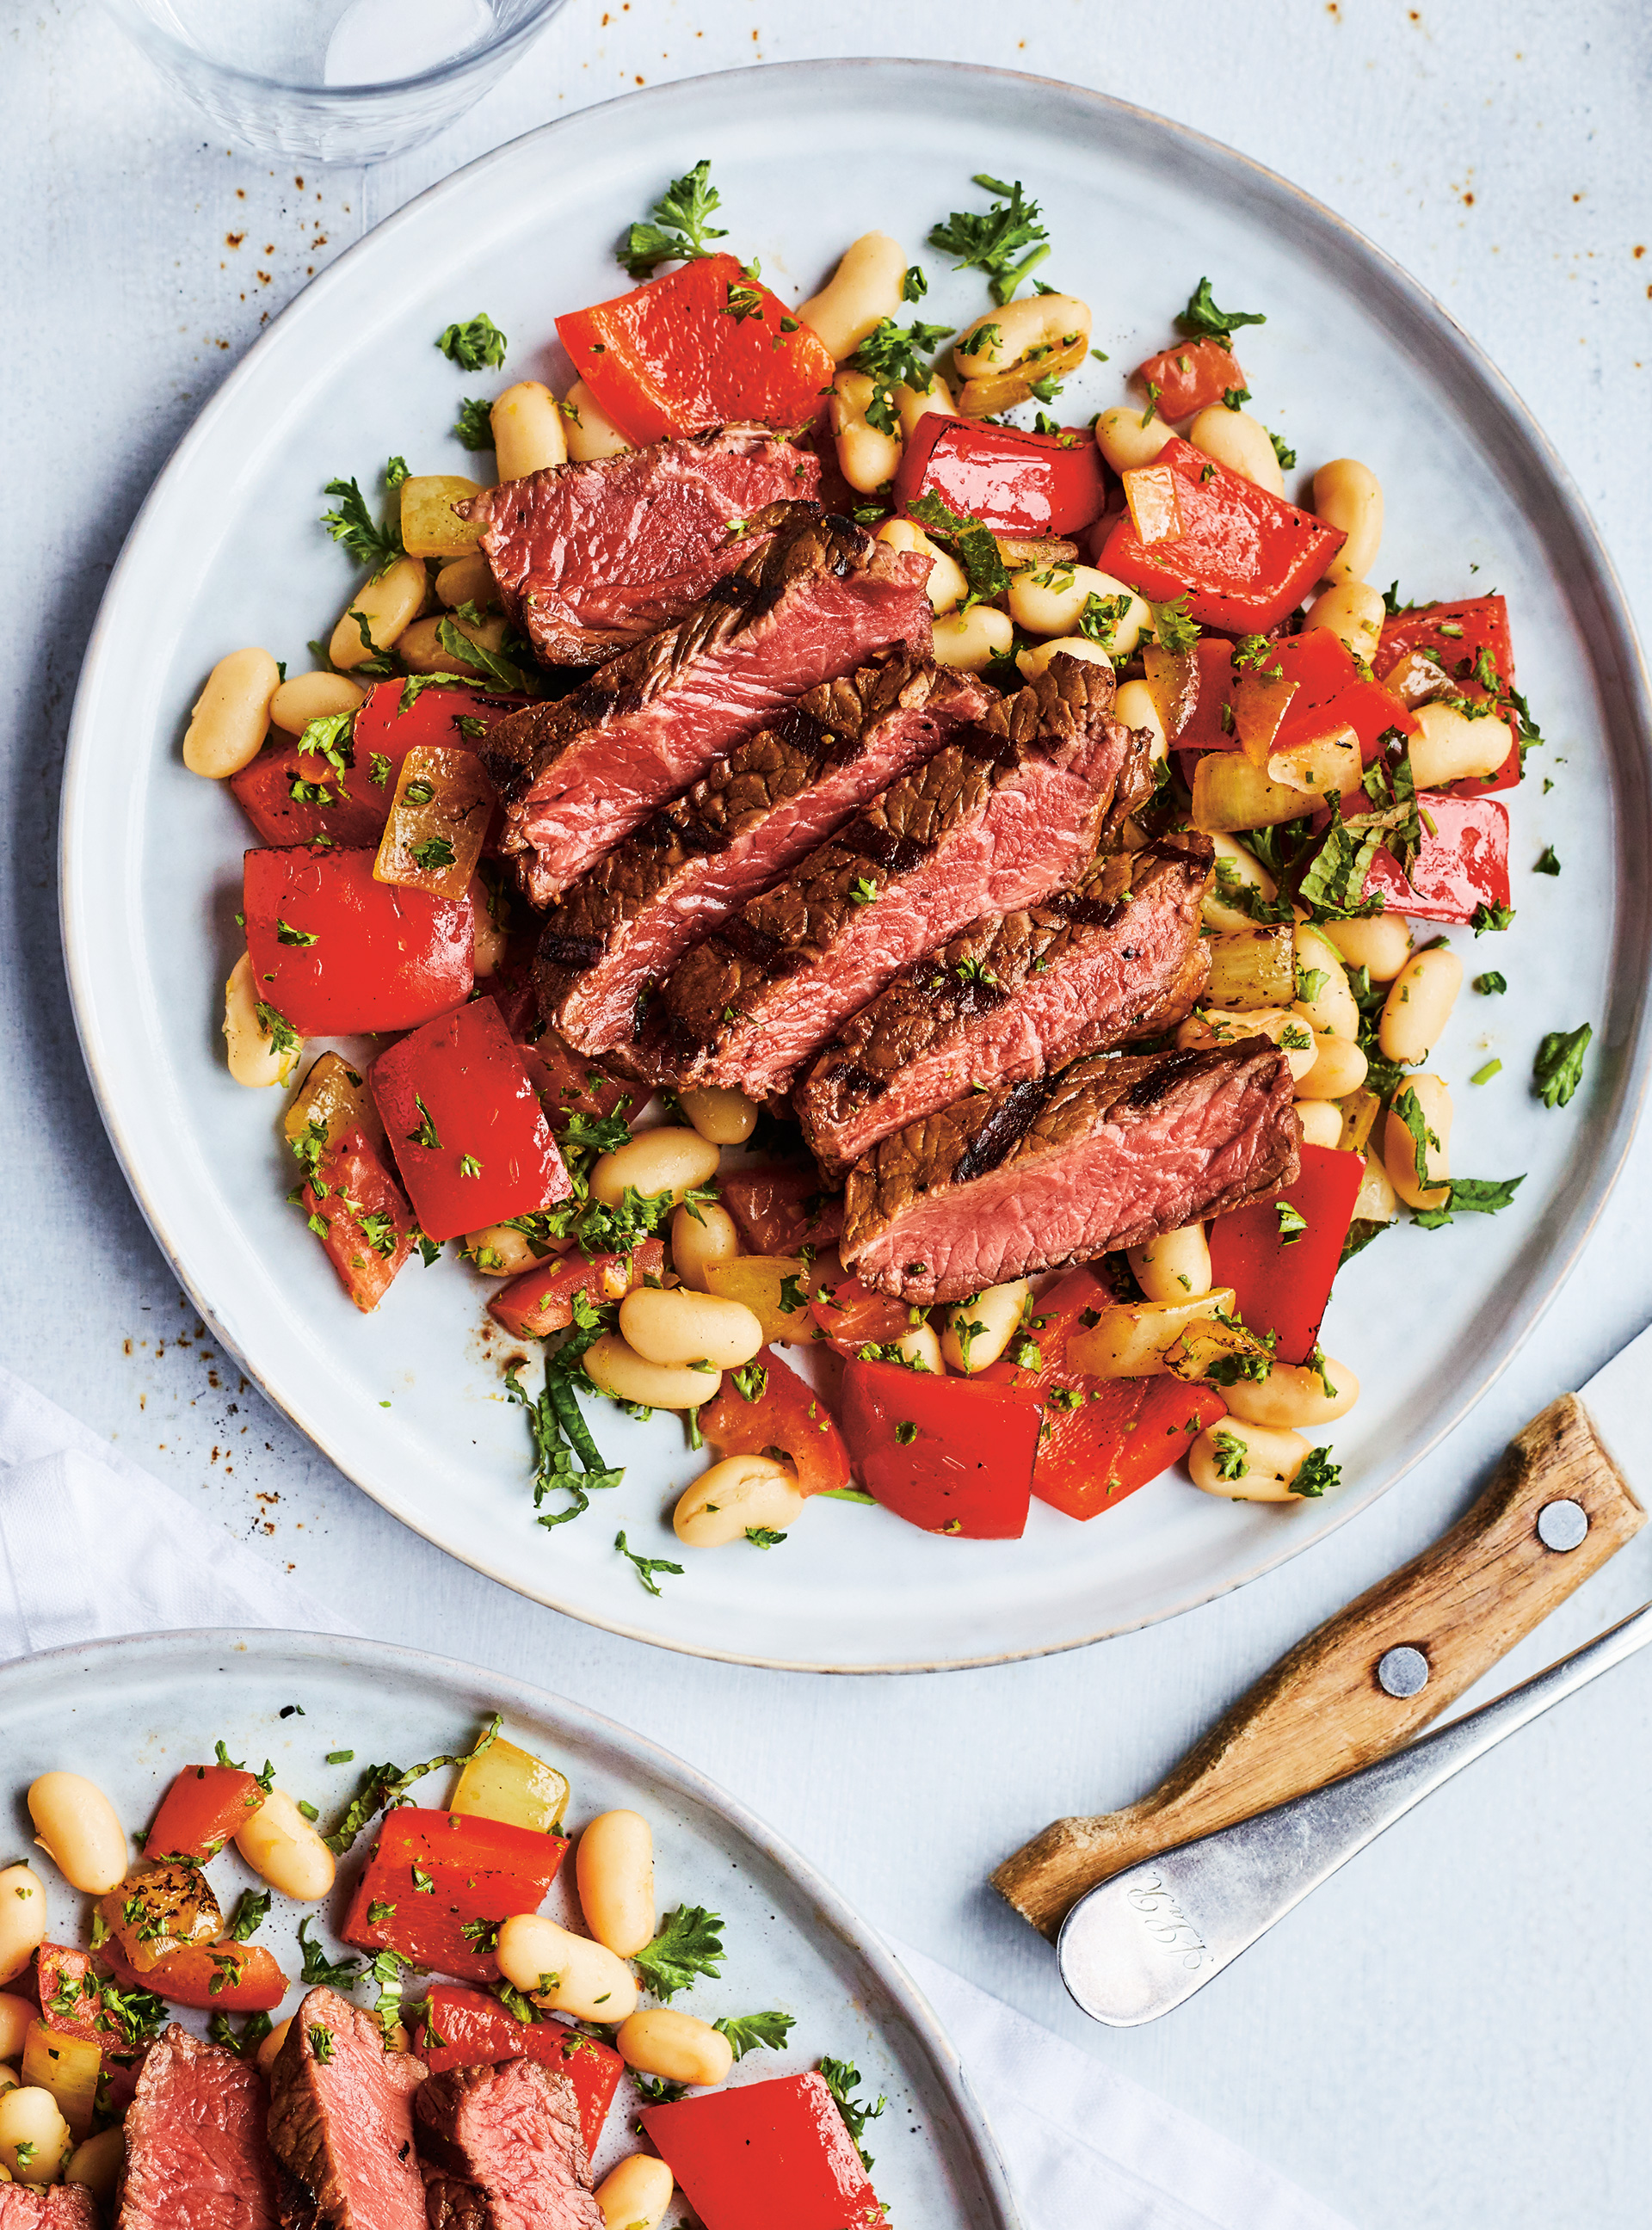 Grilled Beef and White Bean Salad  with Parsley